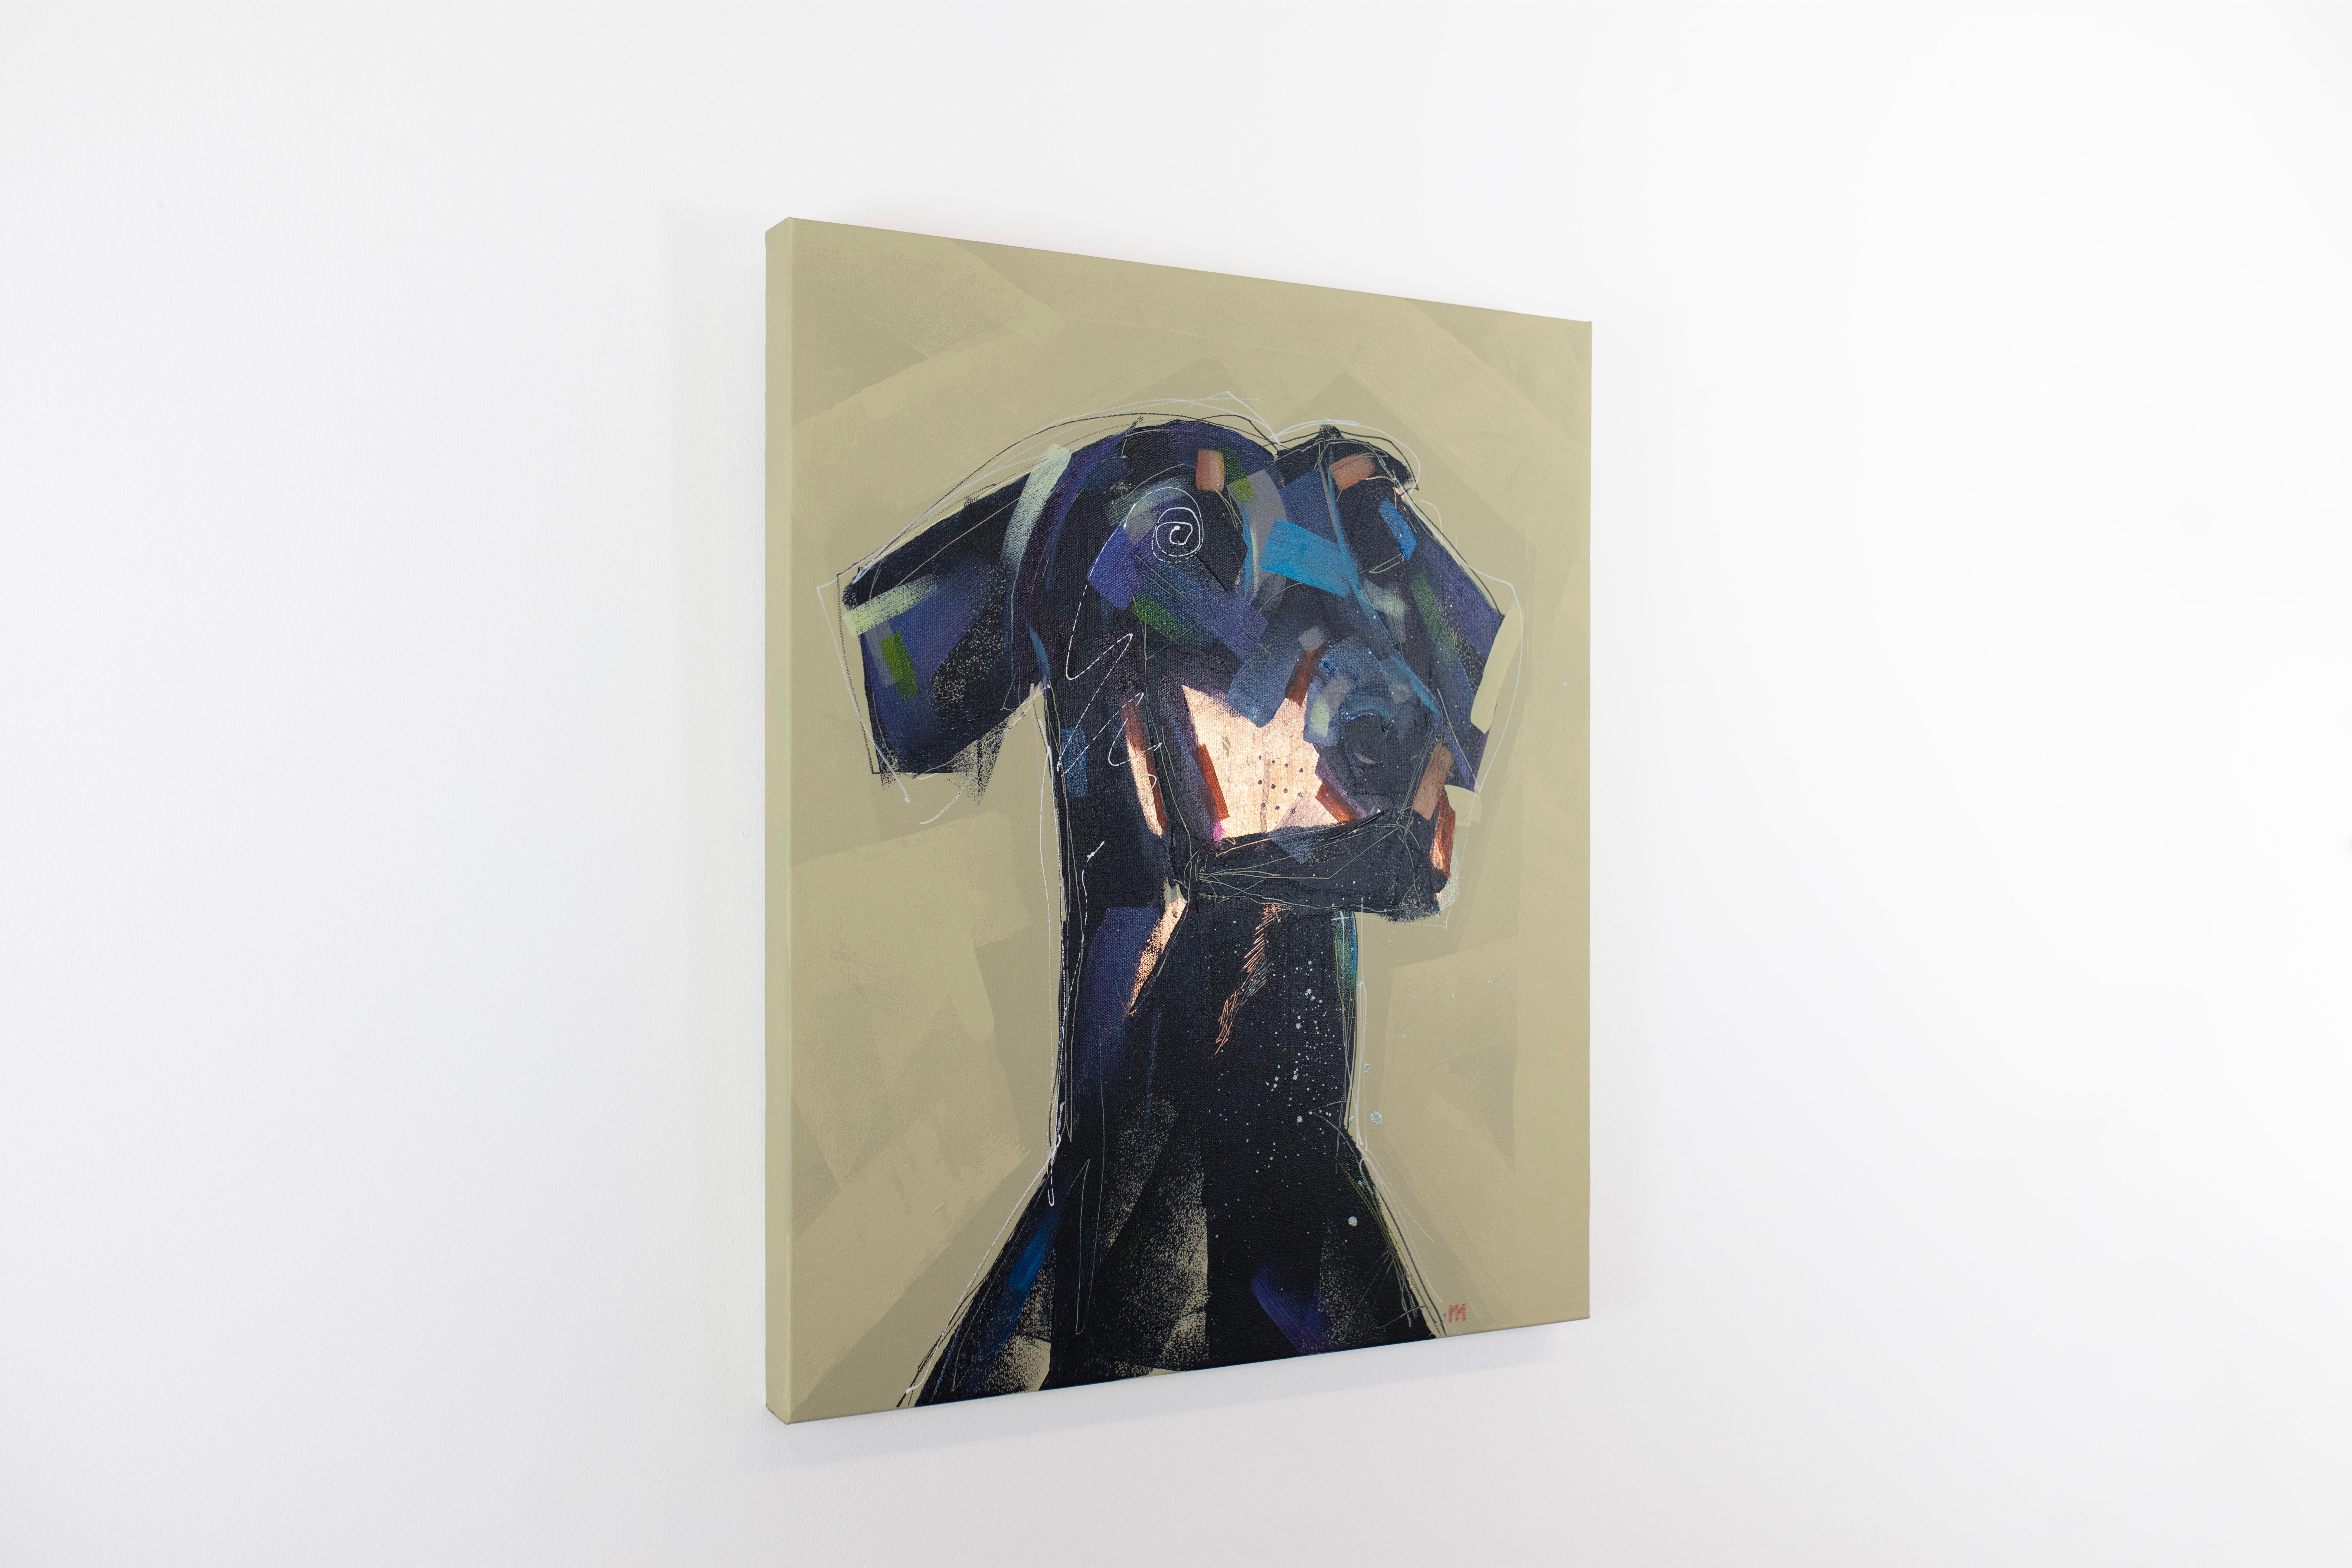 This abstracted painting of a Doberman dog features a loose, energetic style and vibrant colors. The artist layers wide brush strokes and thin, swirling line to create the dog's black, blue, and orange form, with a pale yellow gold background. The